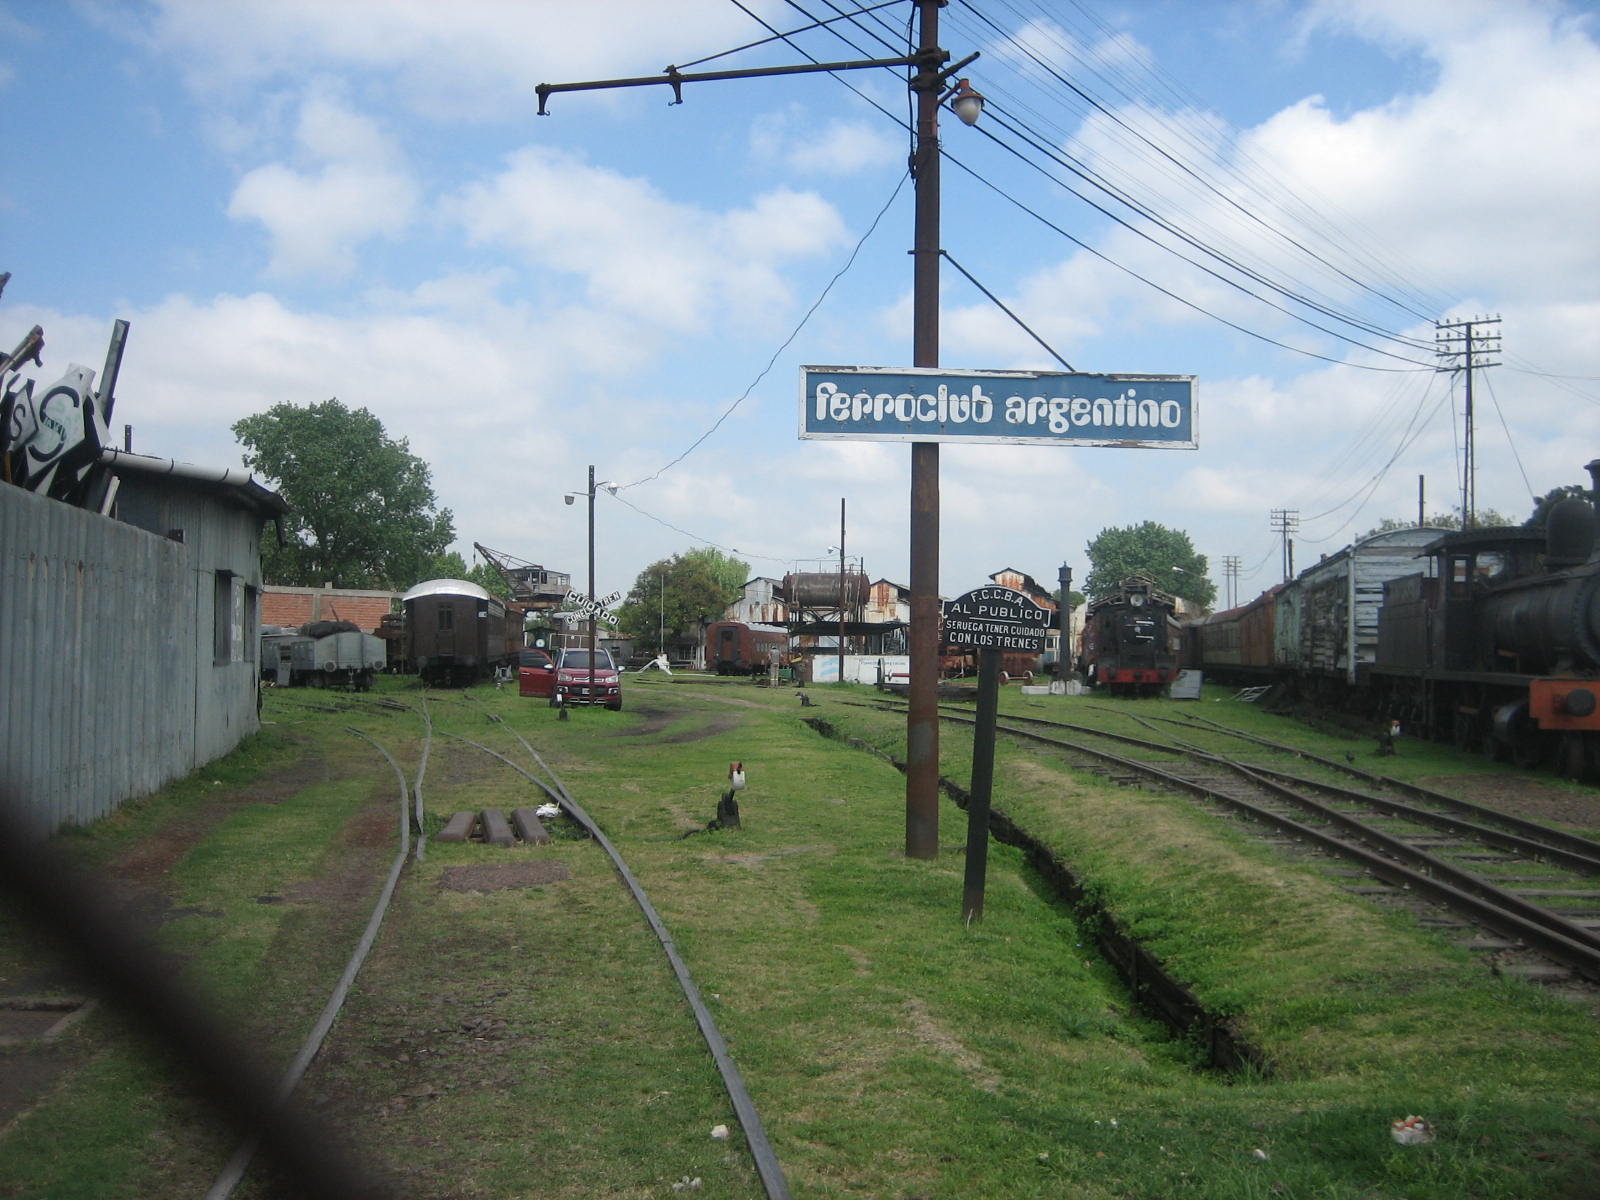 Ferroclub Argentino. A railway preservation yard in a northern suburb of Buenos Aires on the standard-gauge Urquiza line.